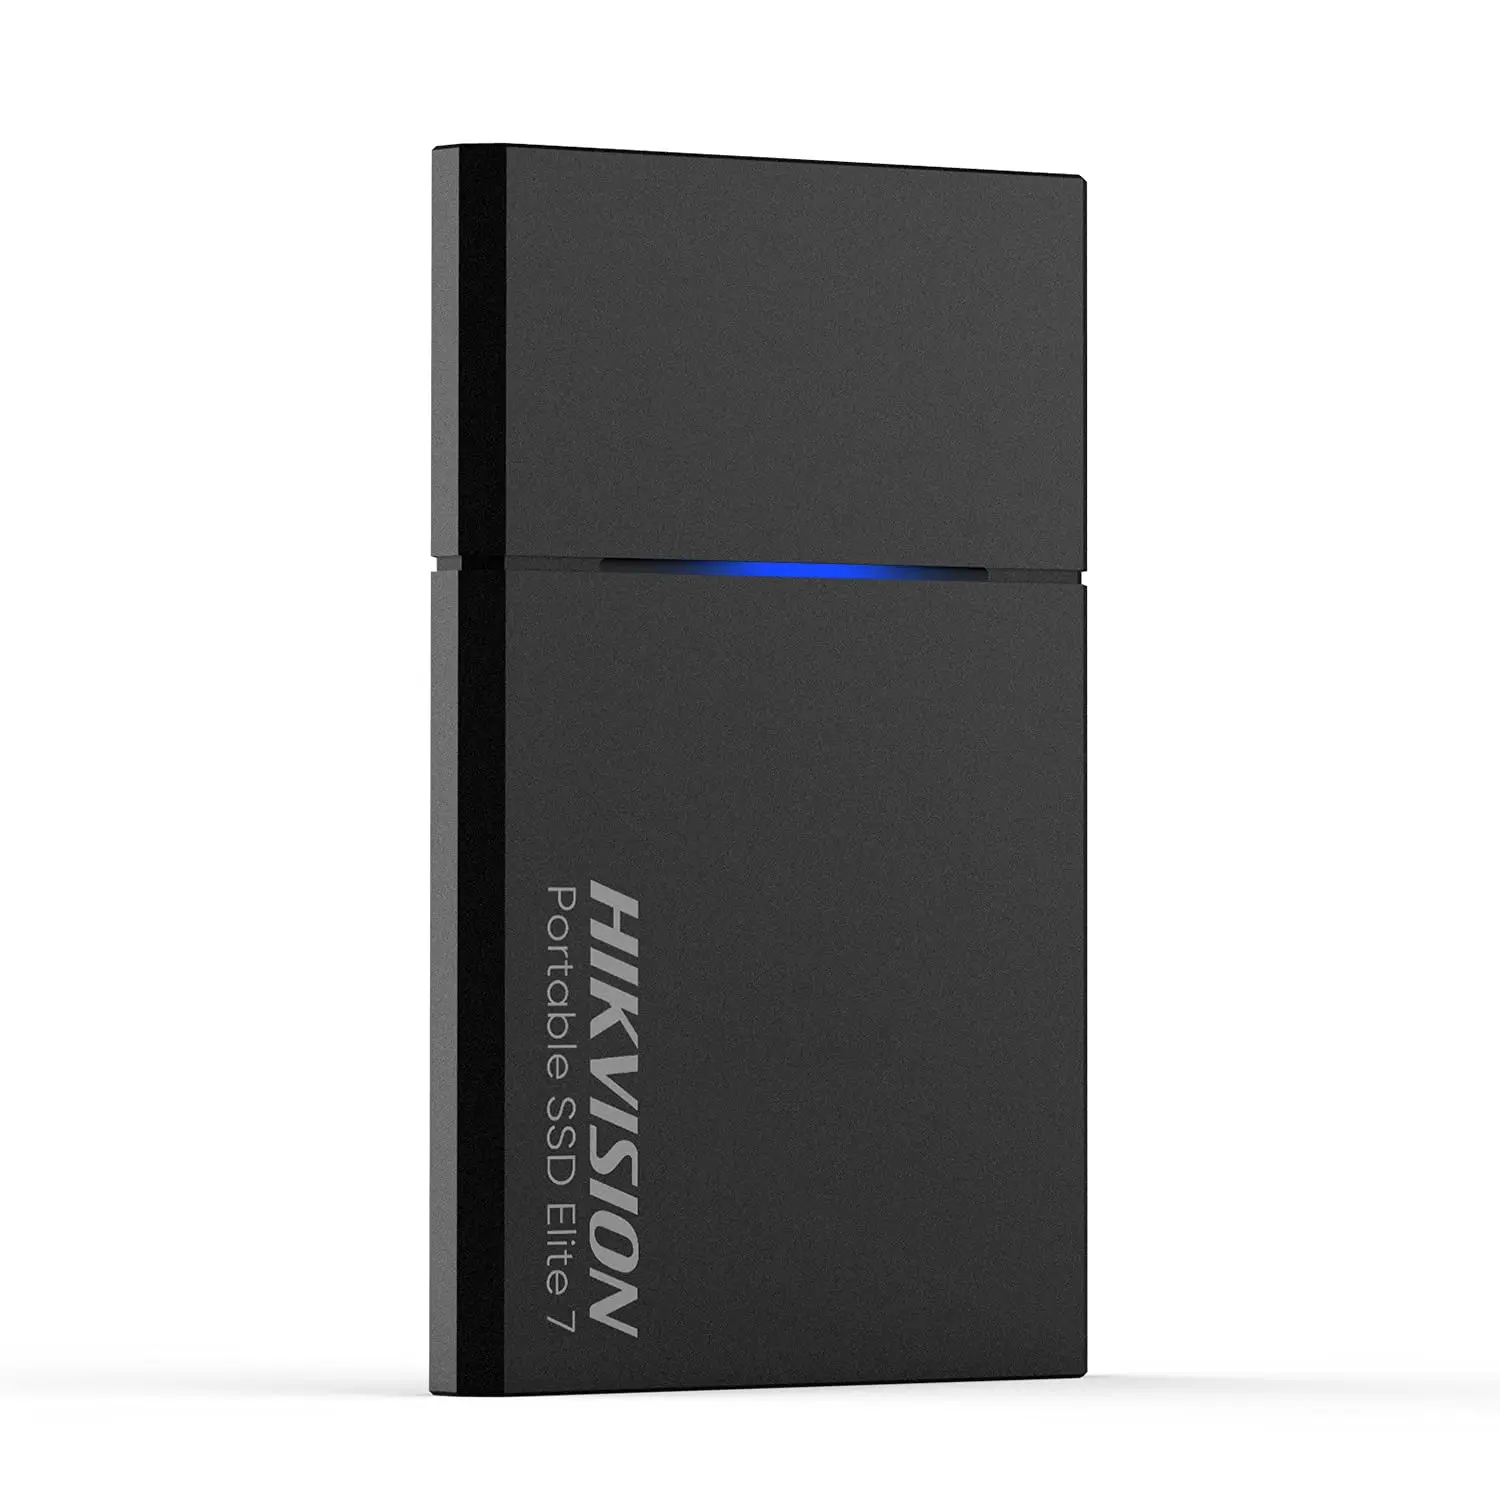 

HIKVISION Elite 7 Portable SSD 500GB - Up to 1060 MB/s, USB 3.2 Gen2 External Solid State Drive, Black